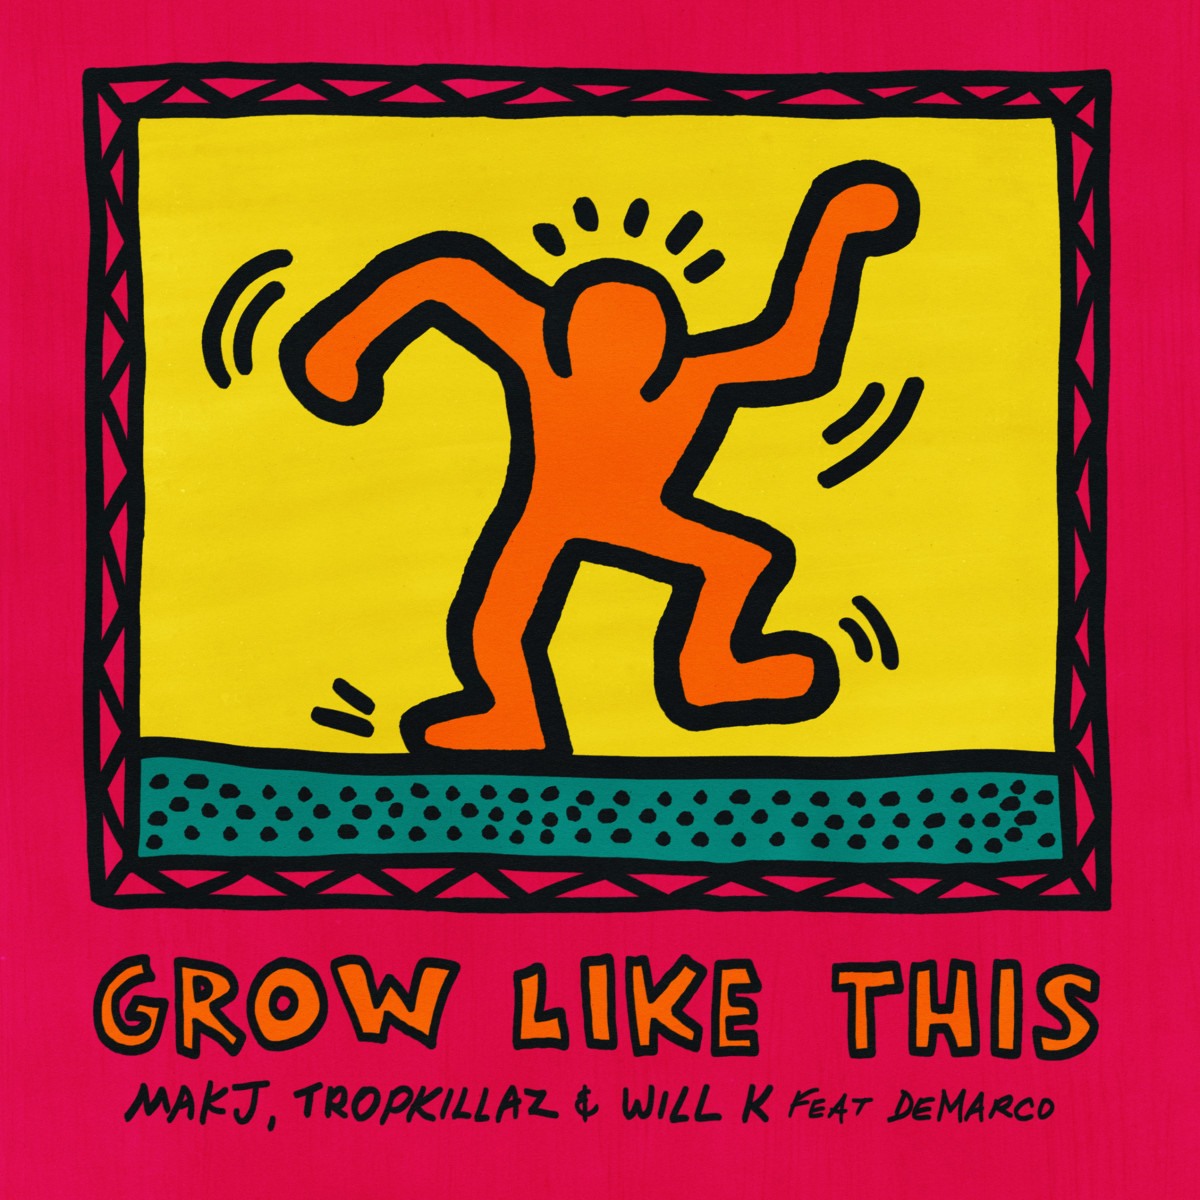 MAKJ, Tropkillaz, & Will K feat. DeMarco - Grow Like This - Out Now on Afterclub / Universal Music (Latin / Trap Hybrid)